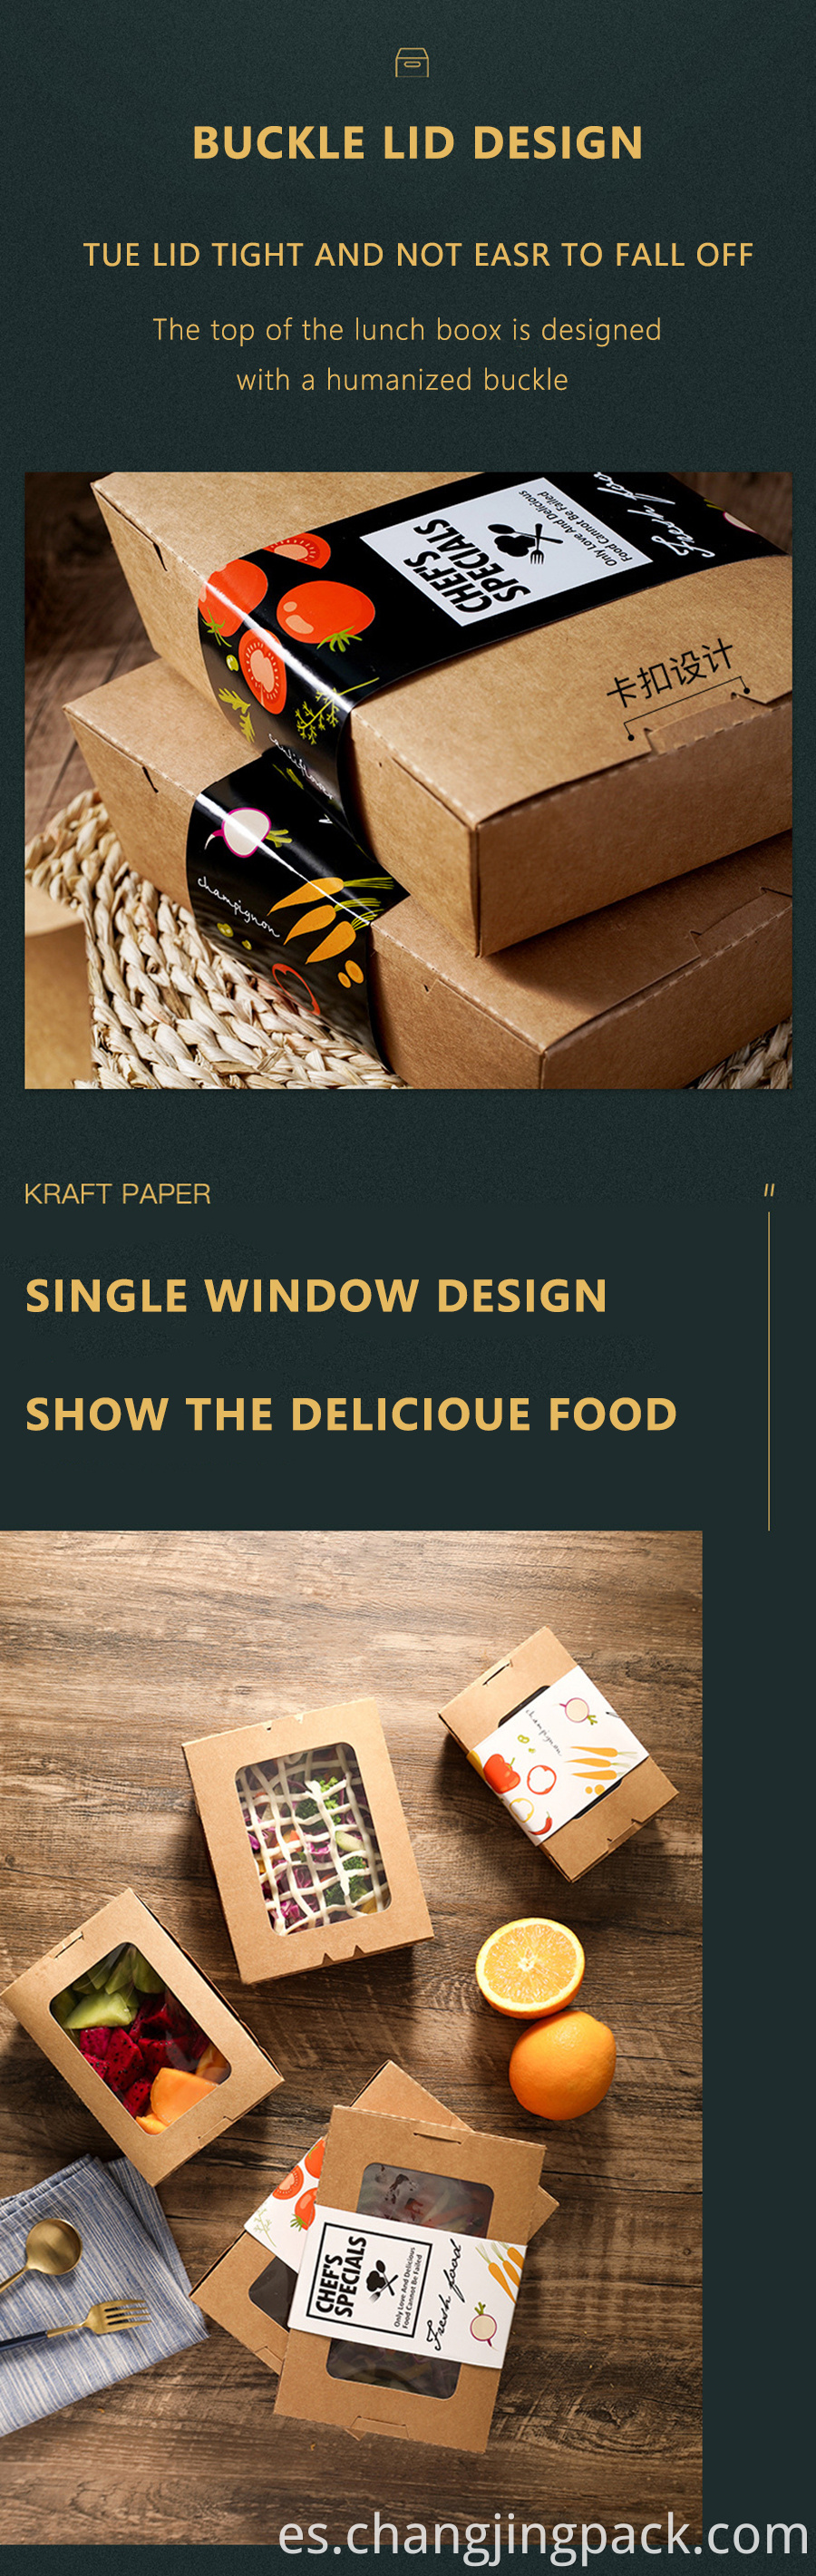 kraft paper rectangle box with lid